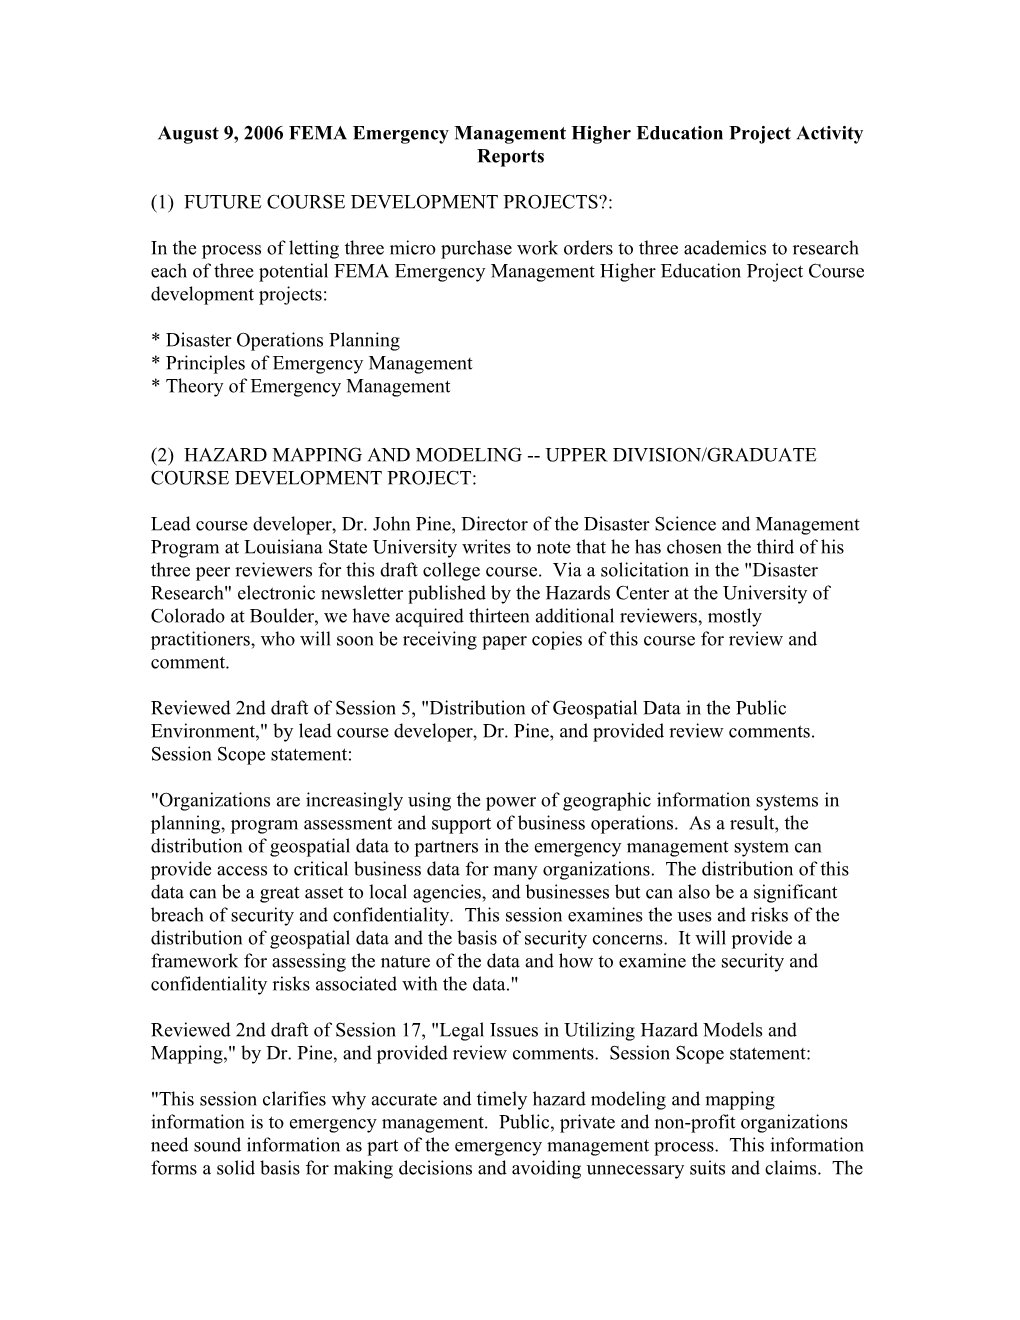 August 9, 2006 FEMA Emergency Management Higher Education Project Activity Reports